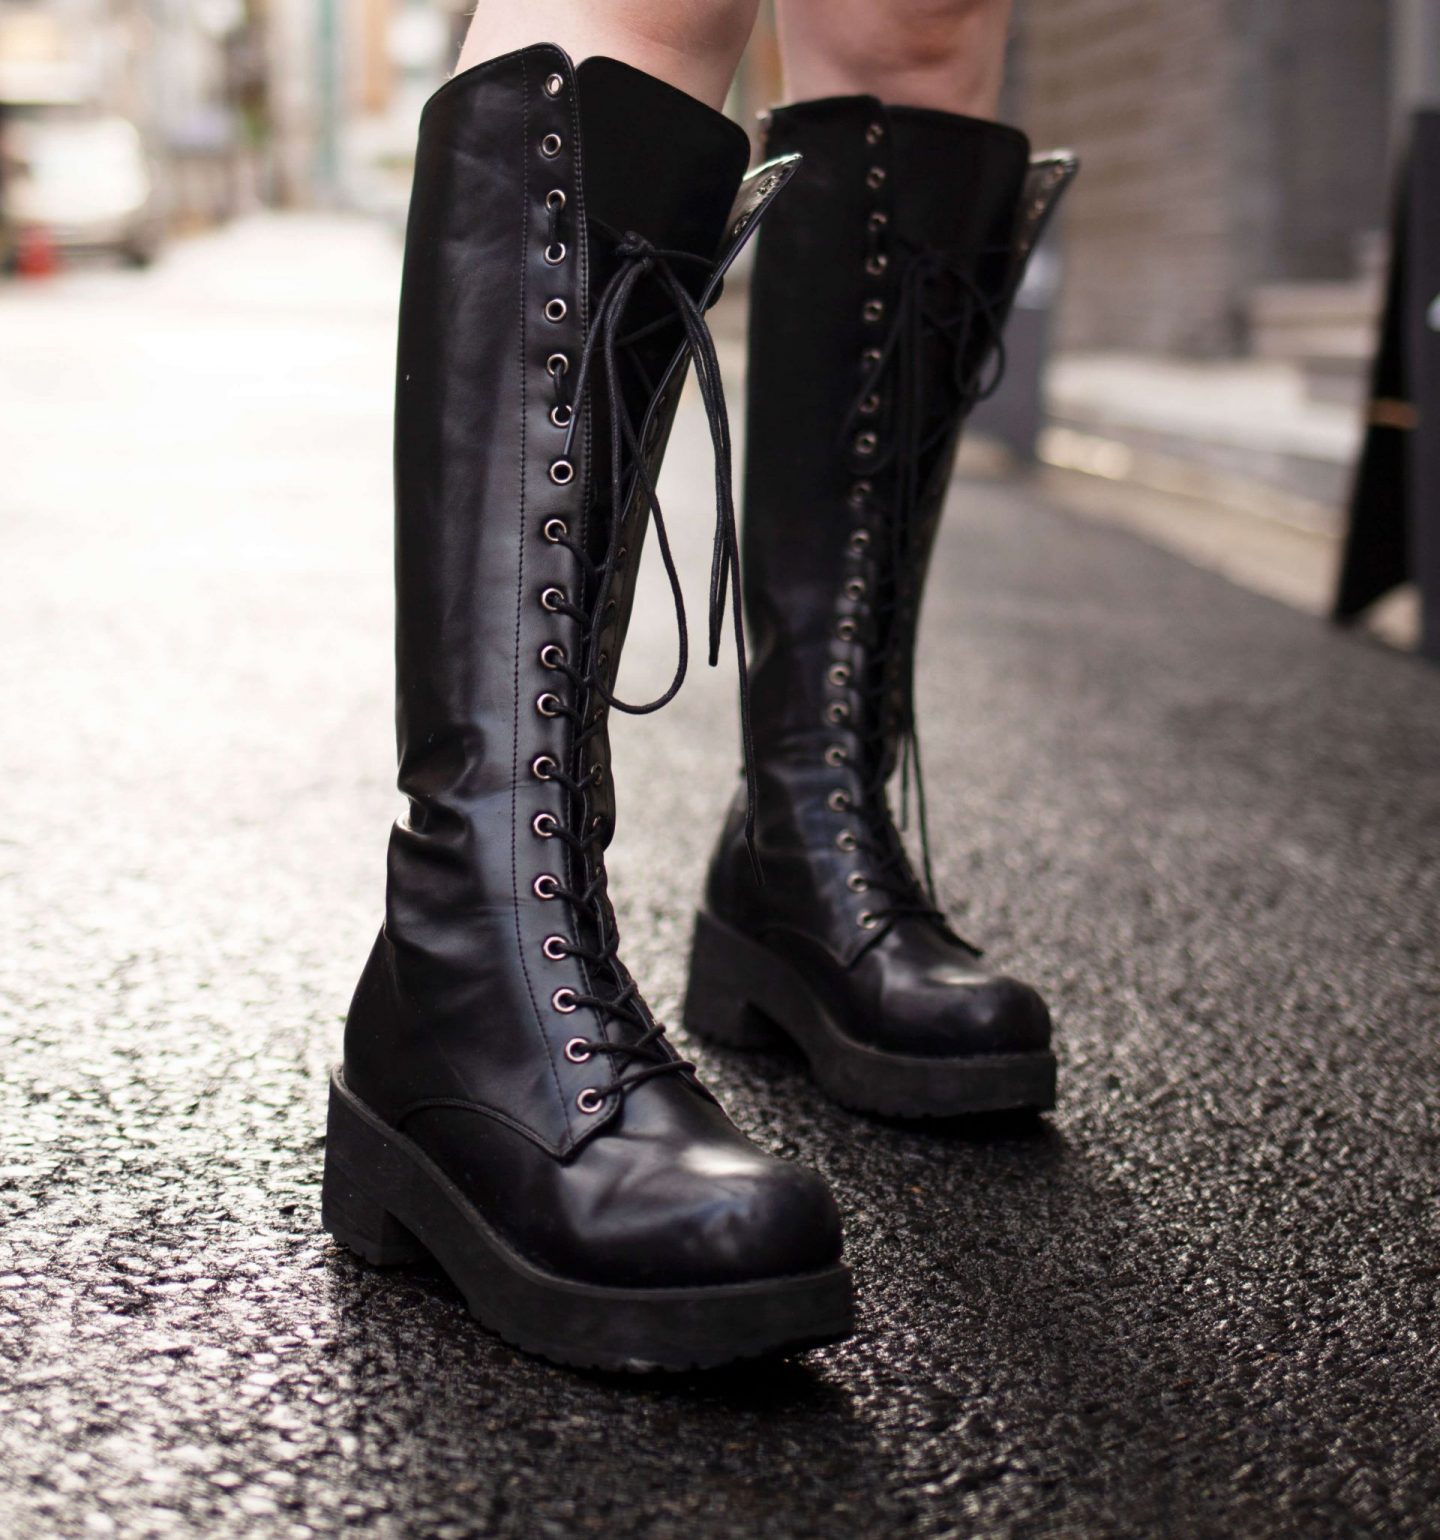 wardrobe staple chunky cleated boots